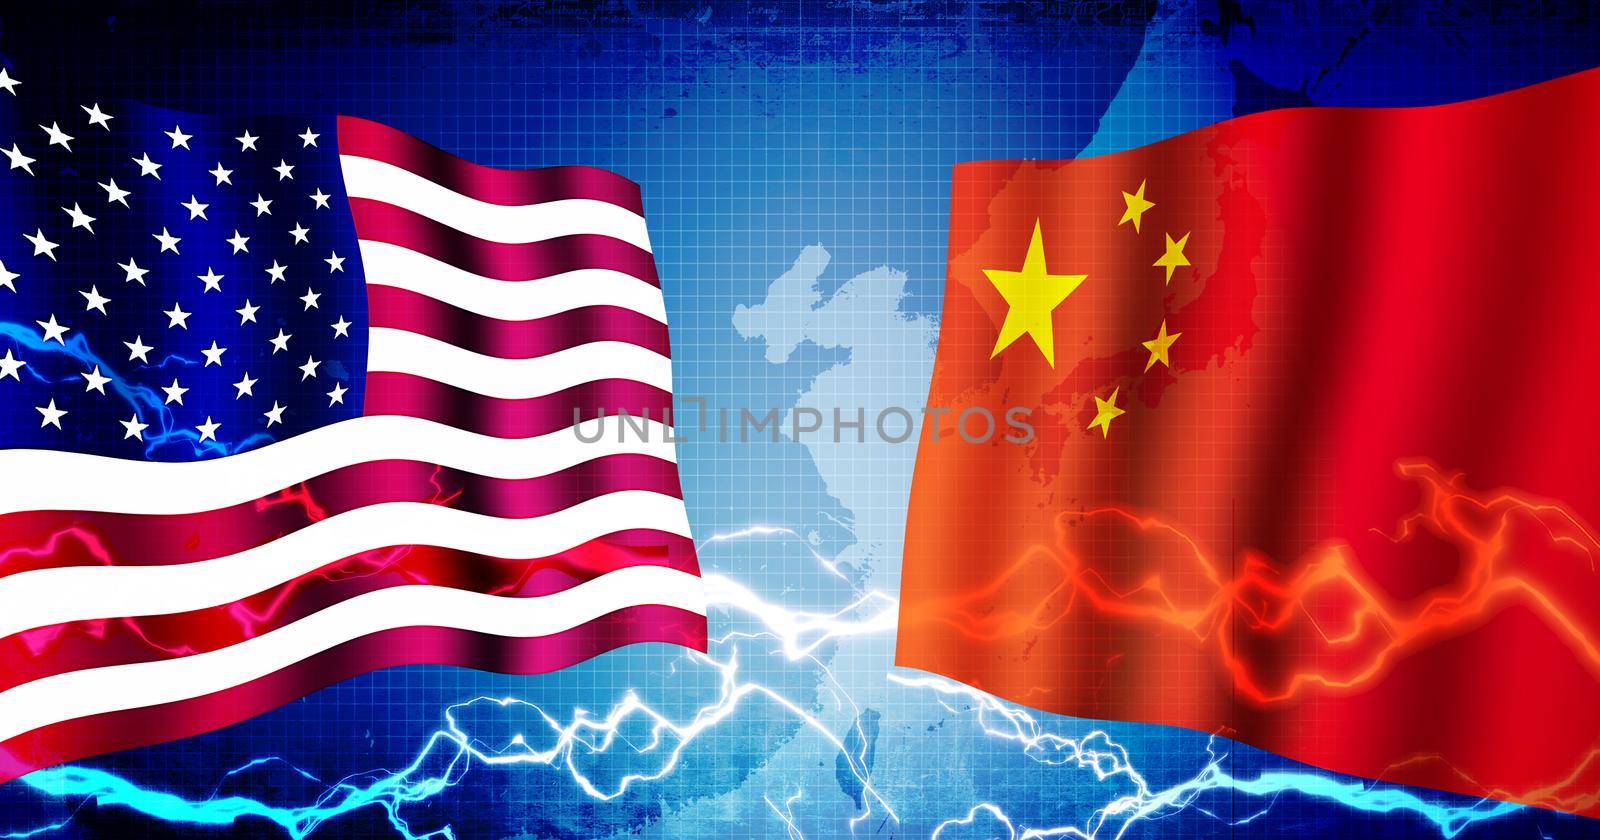 Political confrontation between USA and China / web banner background illustration by barks